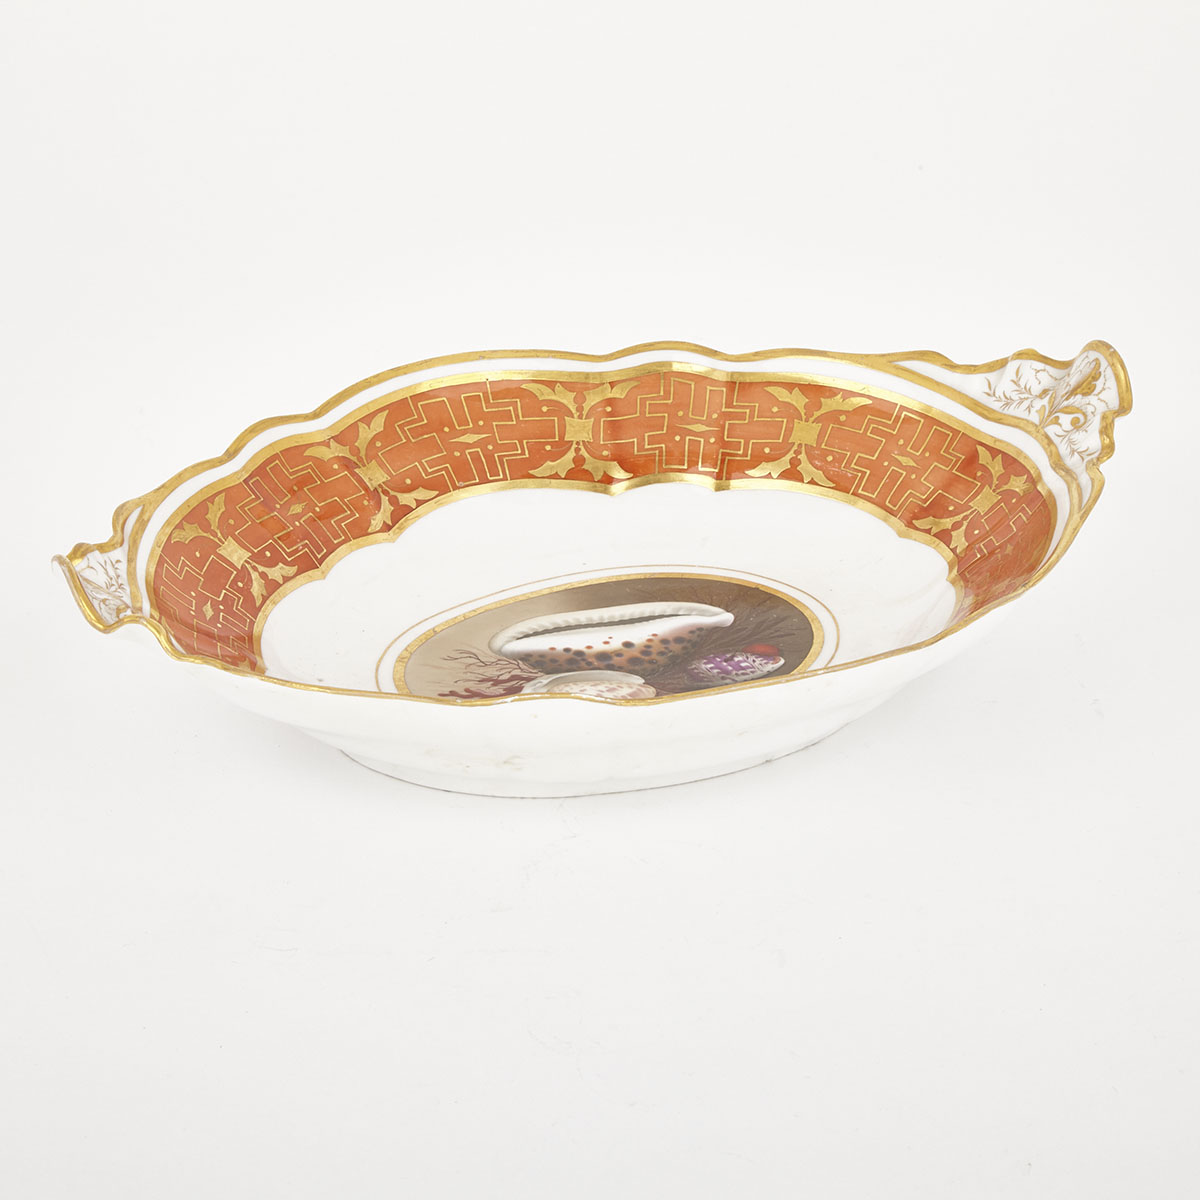 Barr, Flight and Barr Worcester Scalloped Oval Dish, c.1807-13